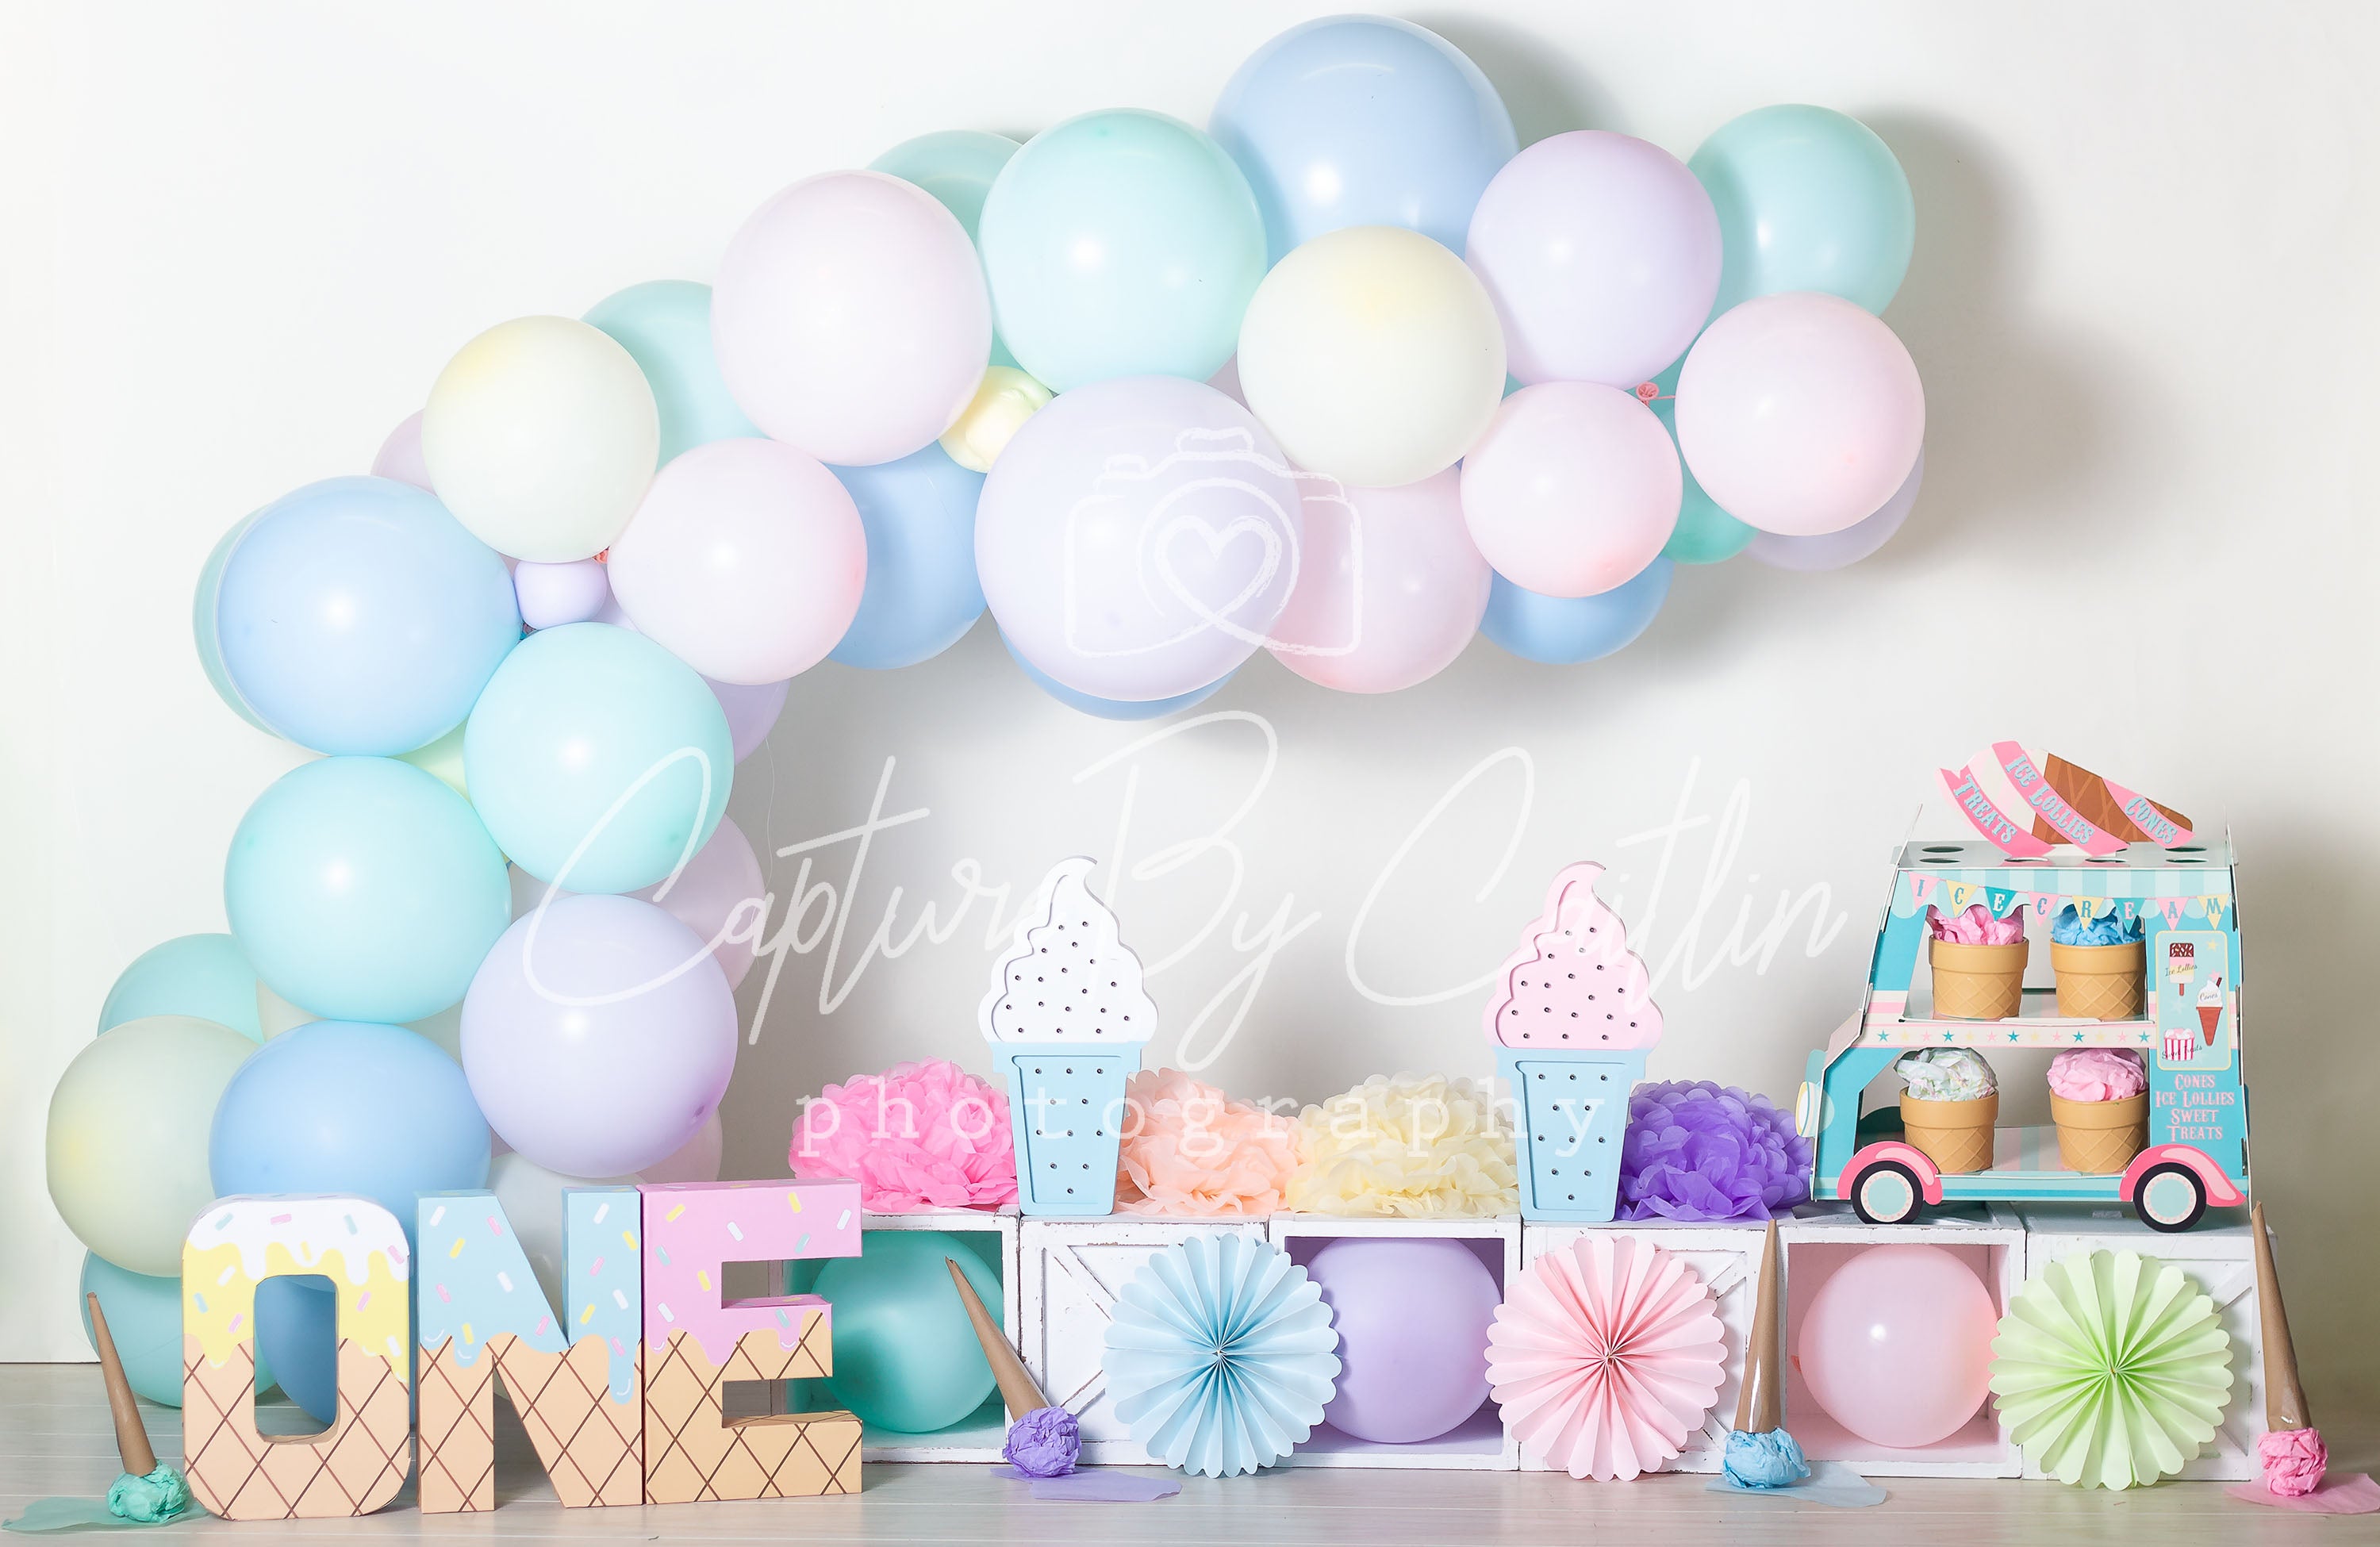 Kate Pastel Ice Cream Backdrop Designed by Caitlin Lynch